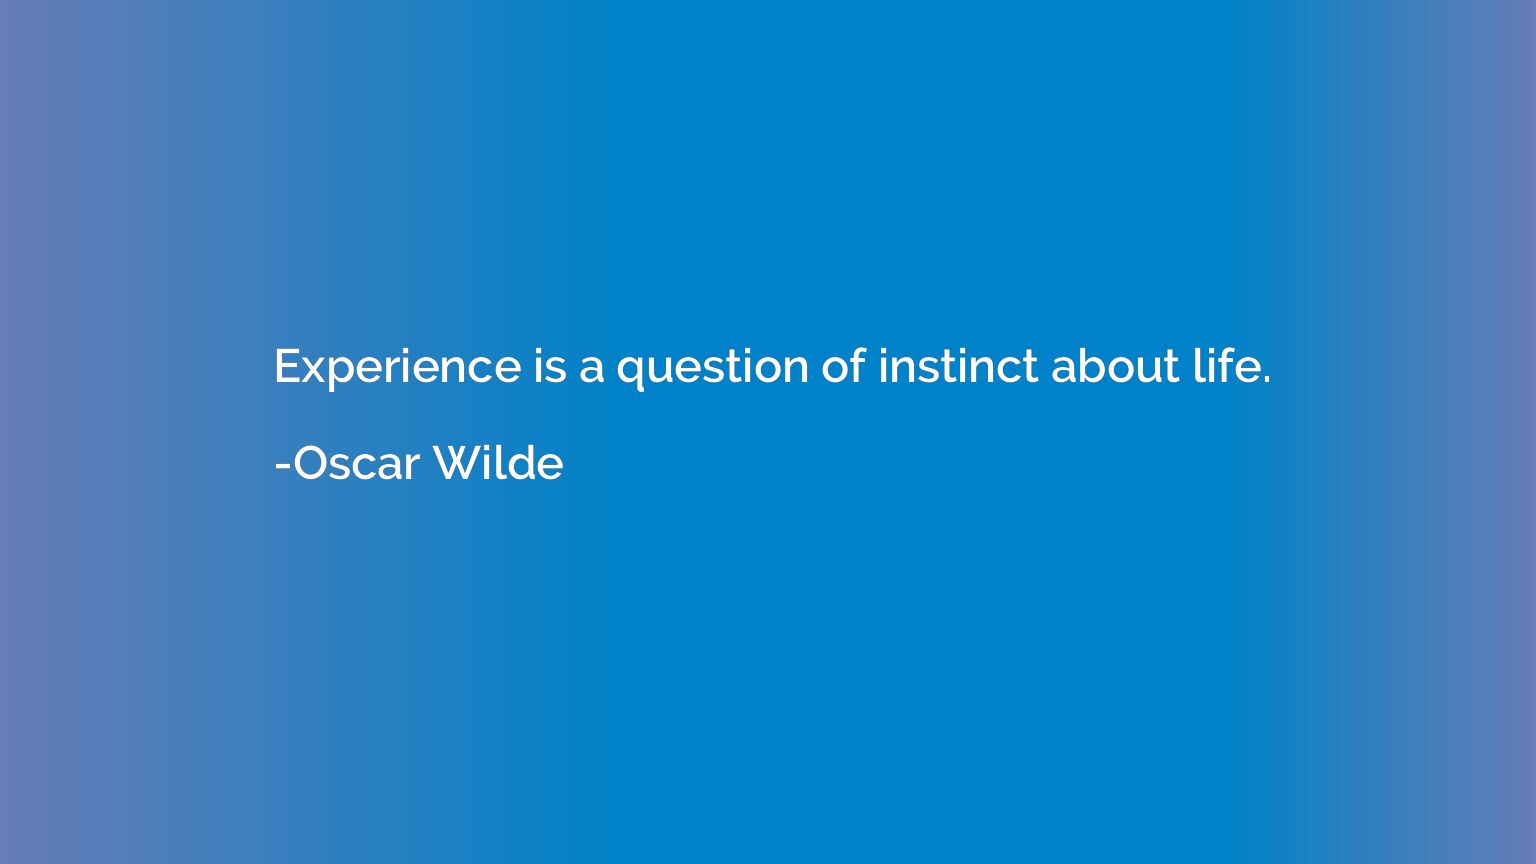 Experience is a question of instinct about life.